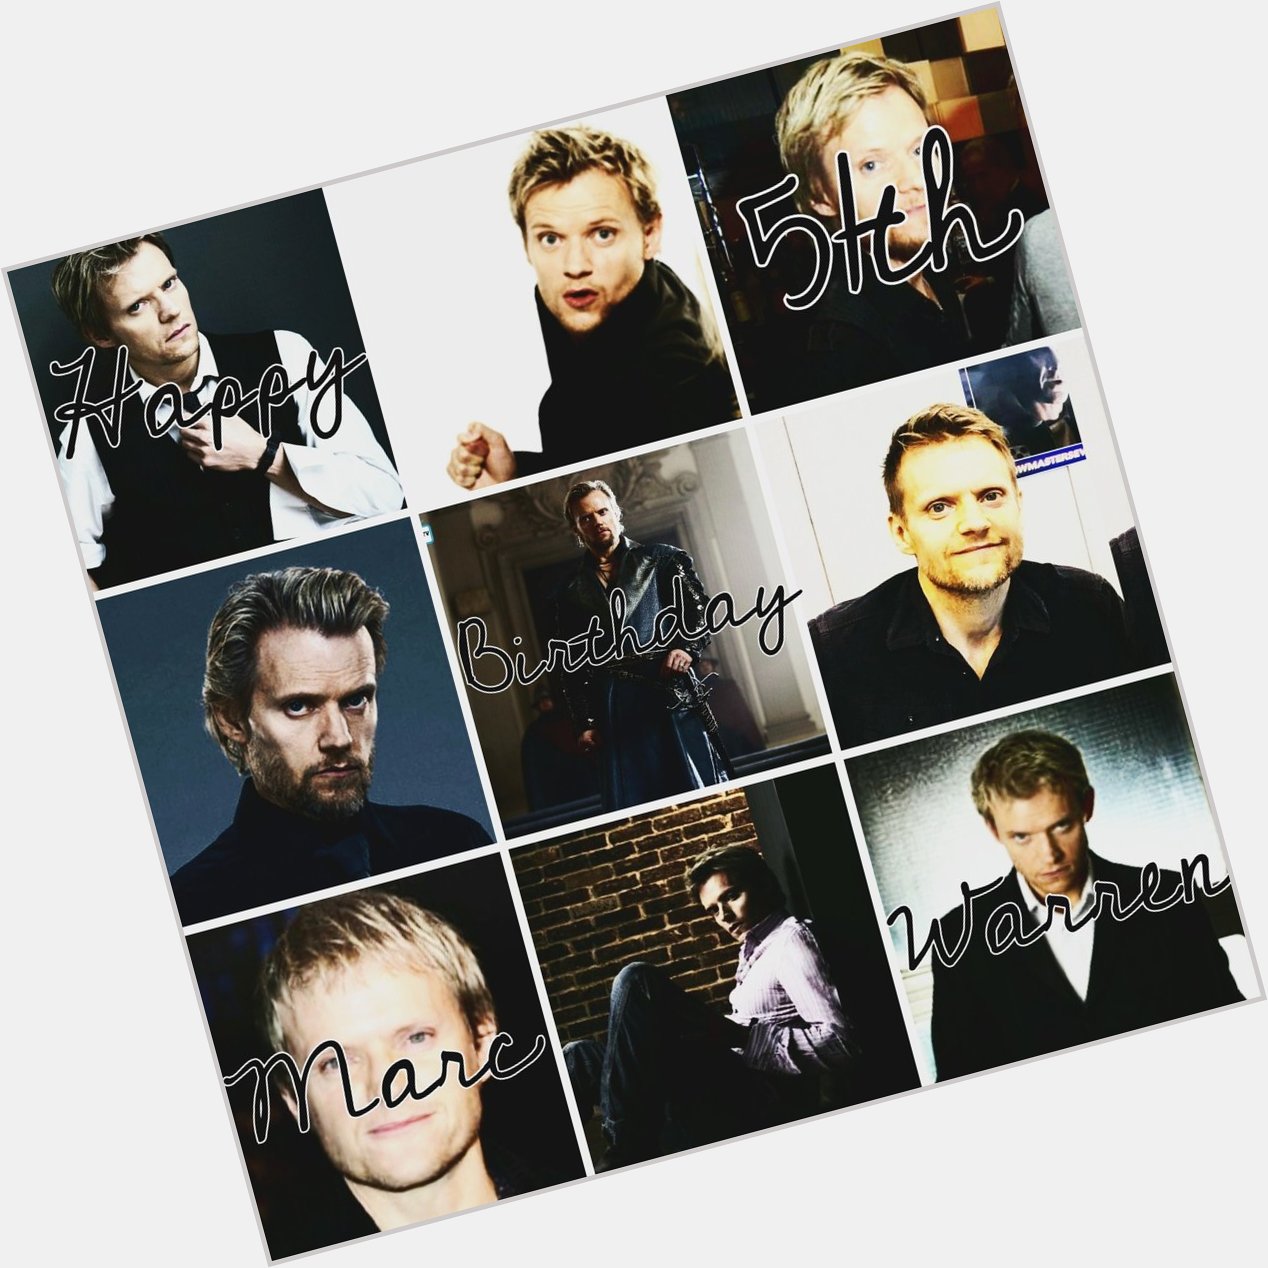   Happy 51th Birthday Marc Warren 

I hope that you will have a splendid day with your family and friends 